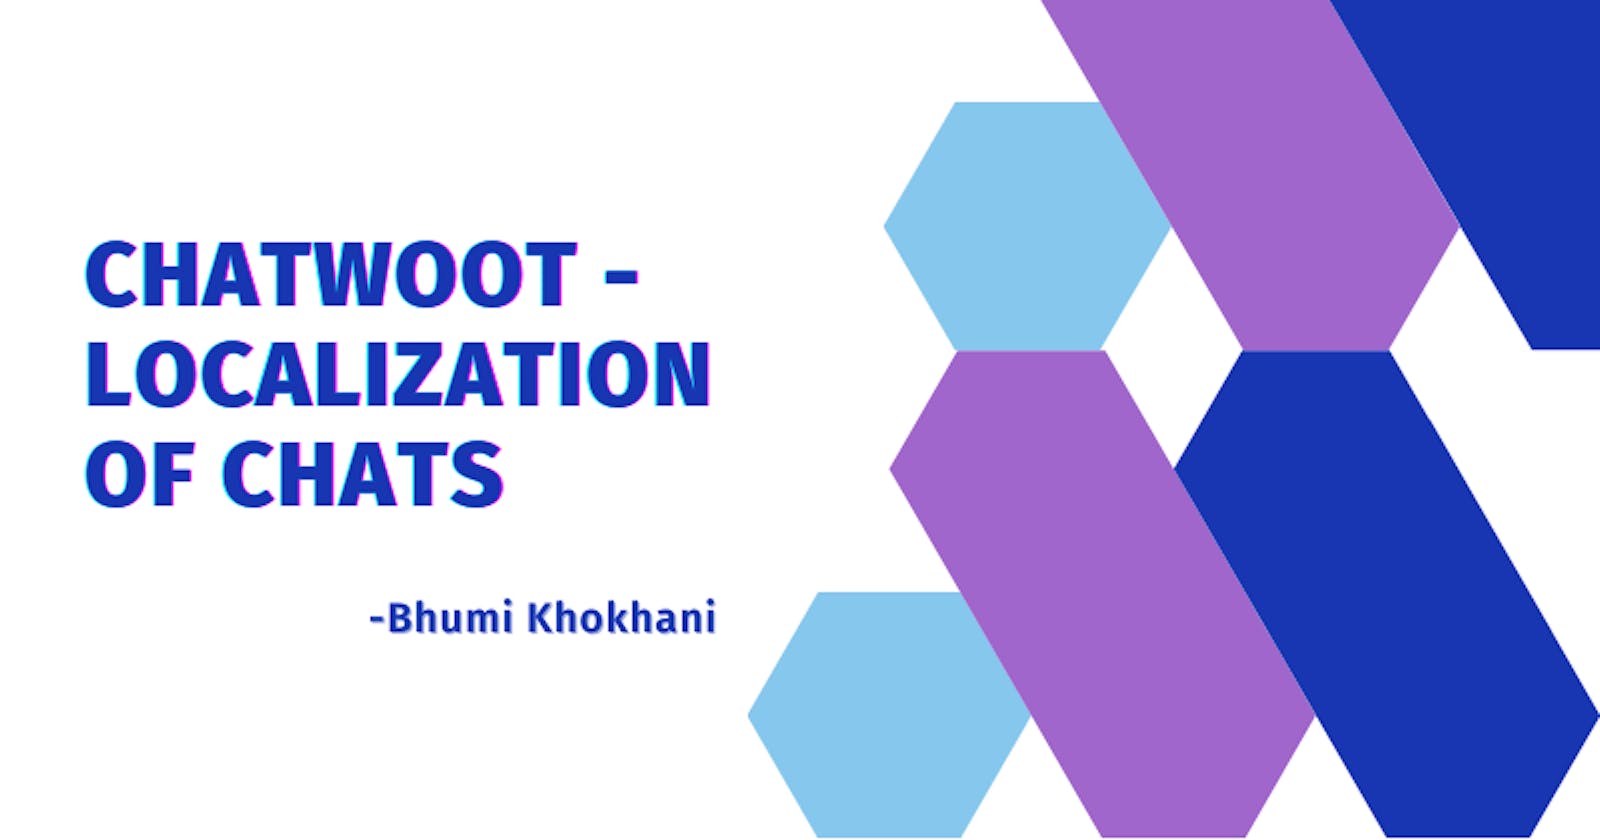 Chatwoot - Localization of Chats